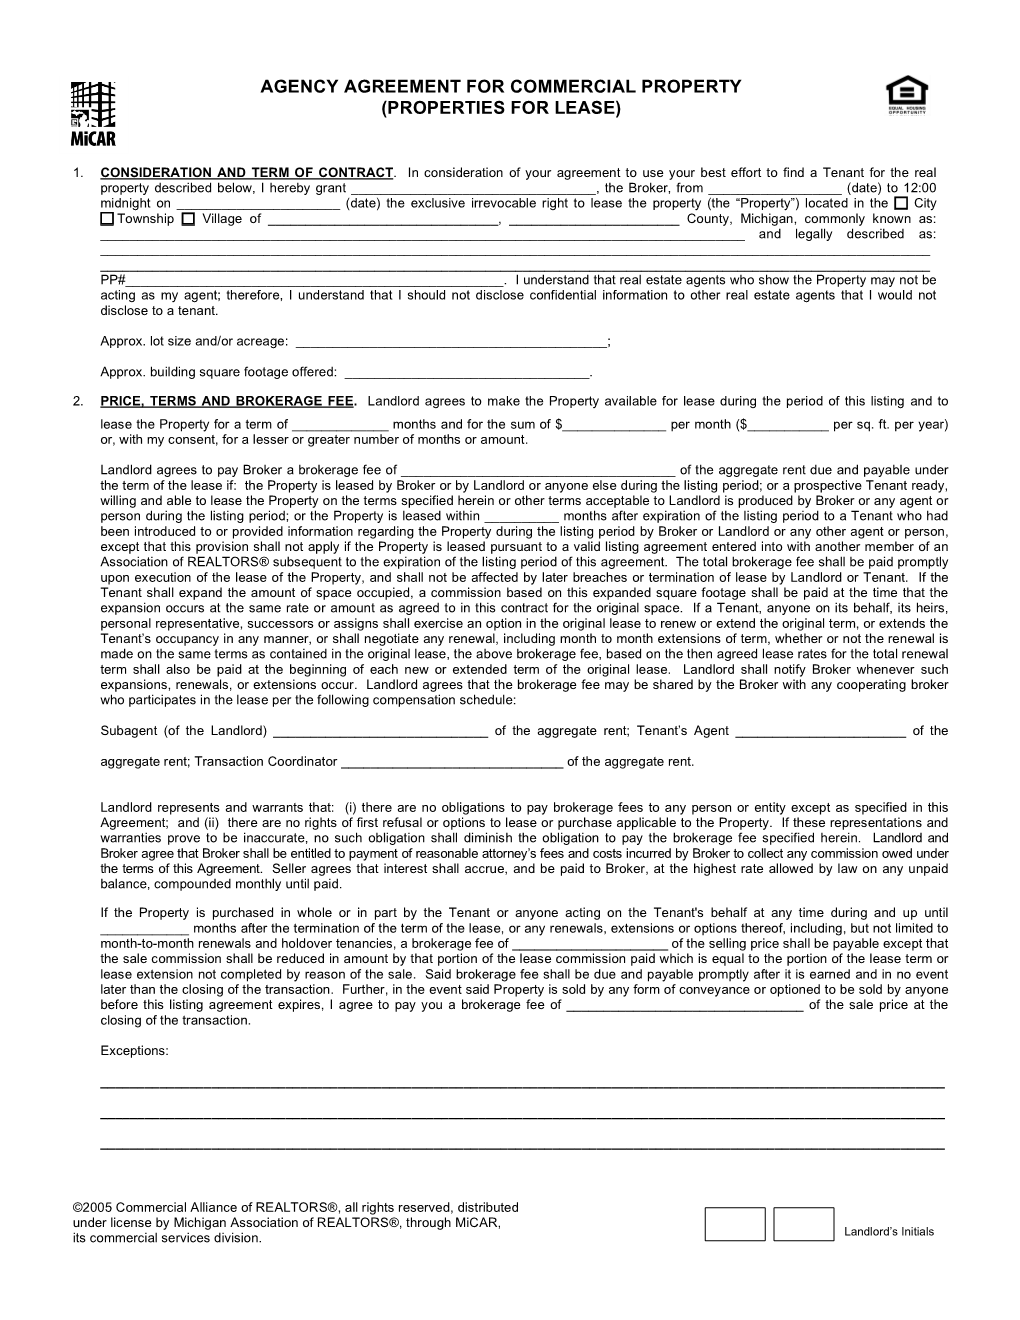 Agency Agreement for Commercial Property (Properties for Lease)